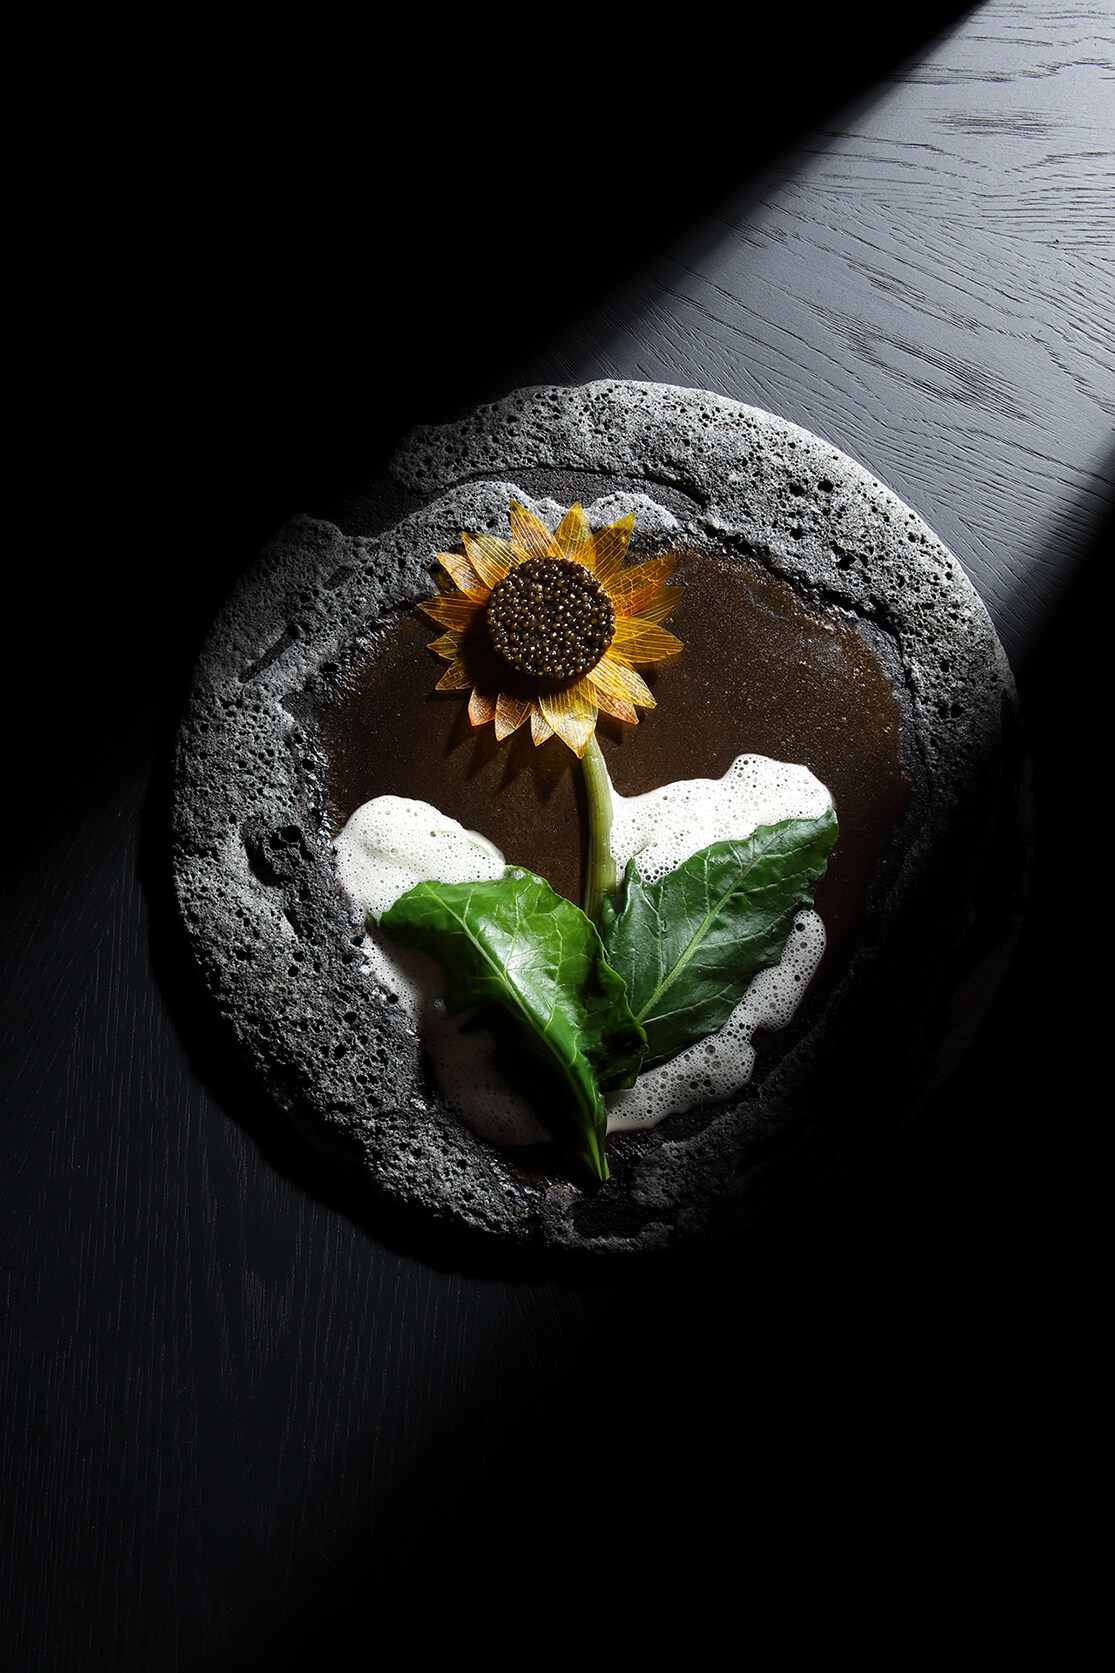 the sunflower has returned. It grew and the taste remains epic - Delta Restaurant, two Stars Michelin, one Green Star